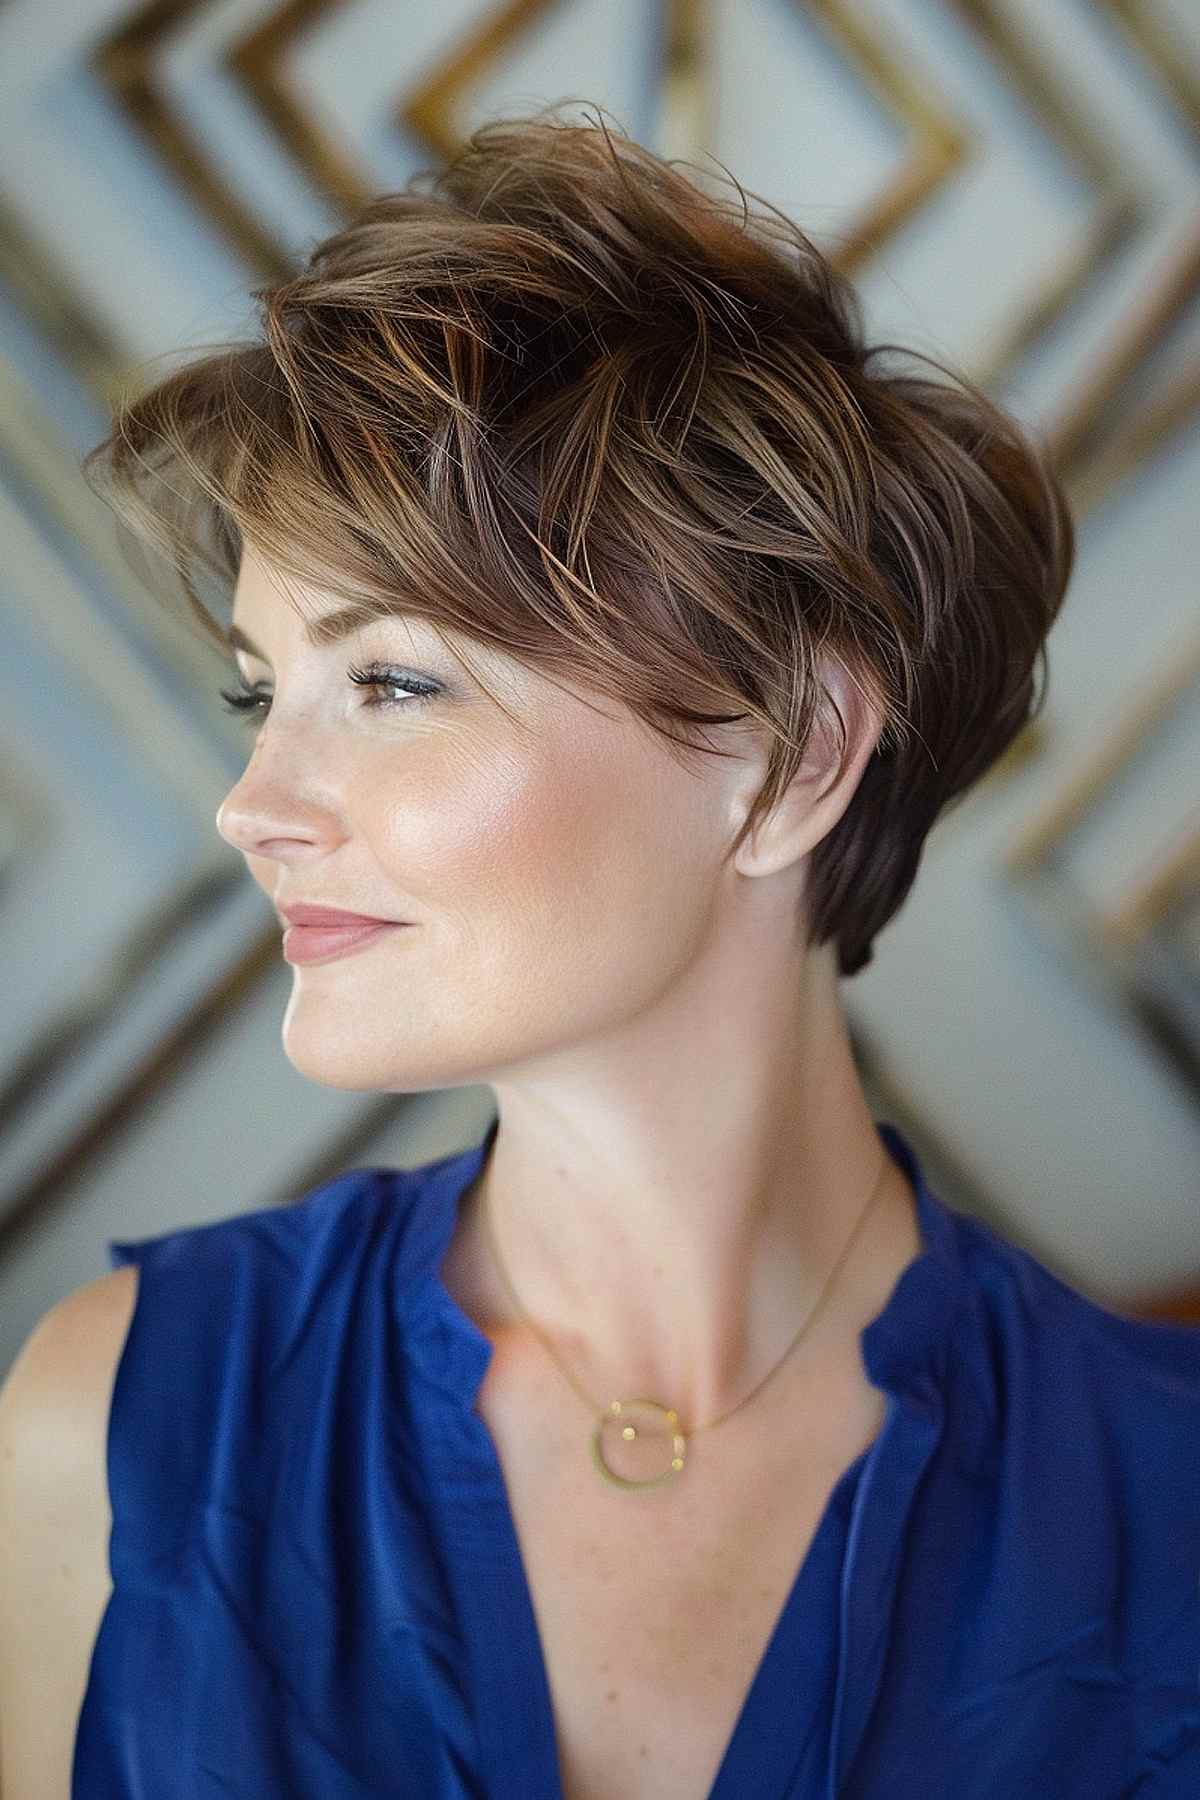 Woman in a blue blouse sporting a feathered pixie cut with subtle caramel highlights, designed to add volume and movement to her fine hair.